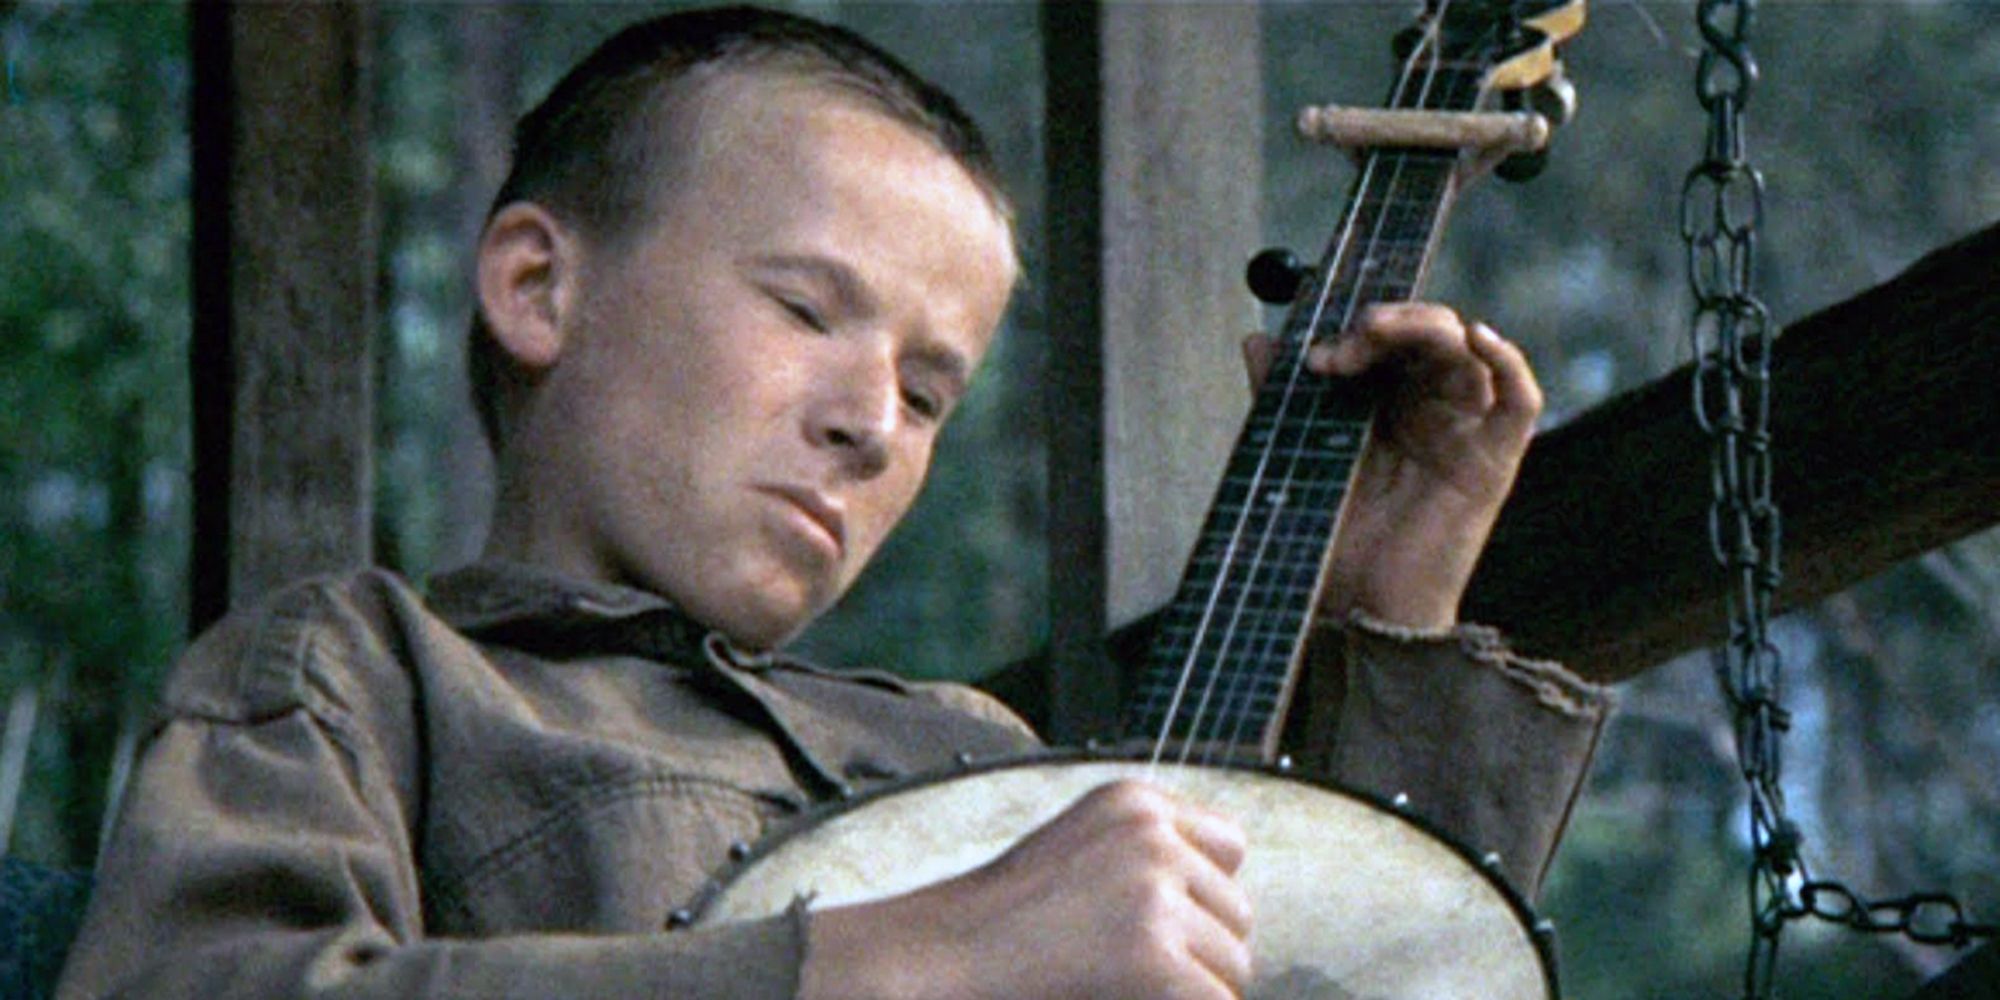 Billy Redden's most famous role was as Lonnie, the creepy banjo-playing inbred in "Deliverance"